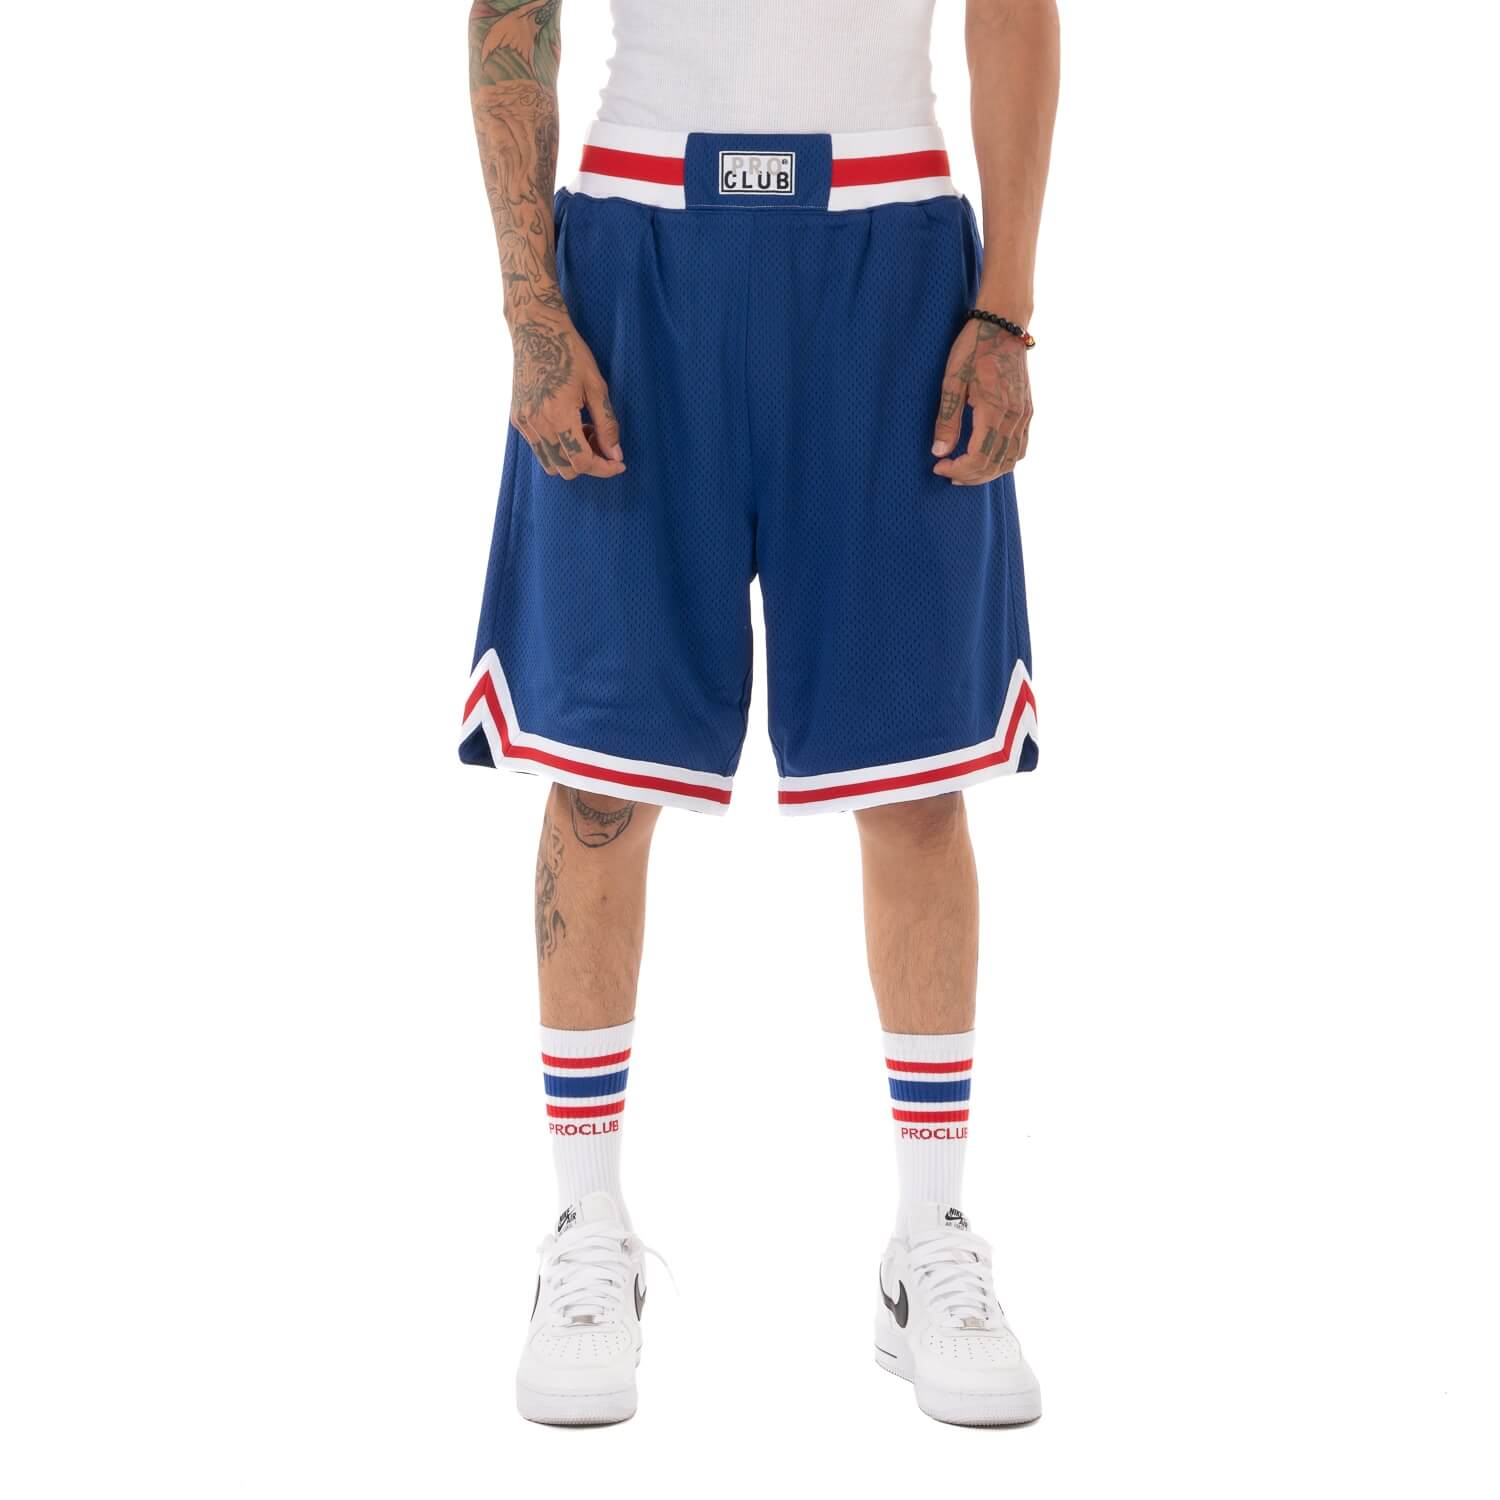 Pro Club Classic Basketball Shorts - Blue/White/Red